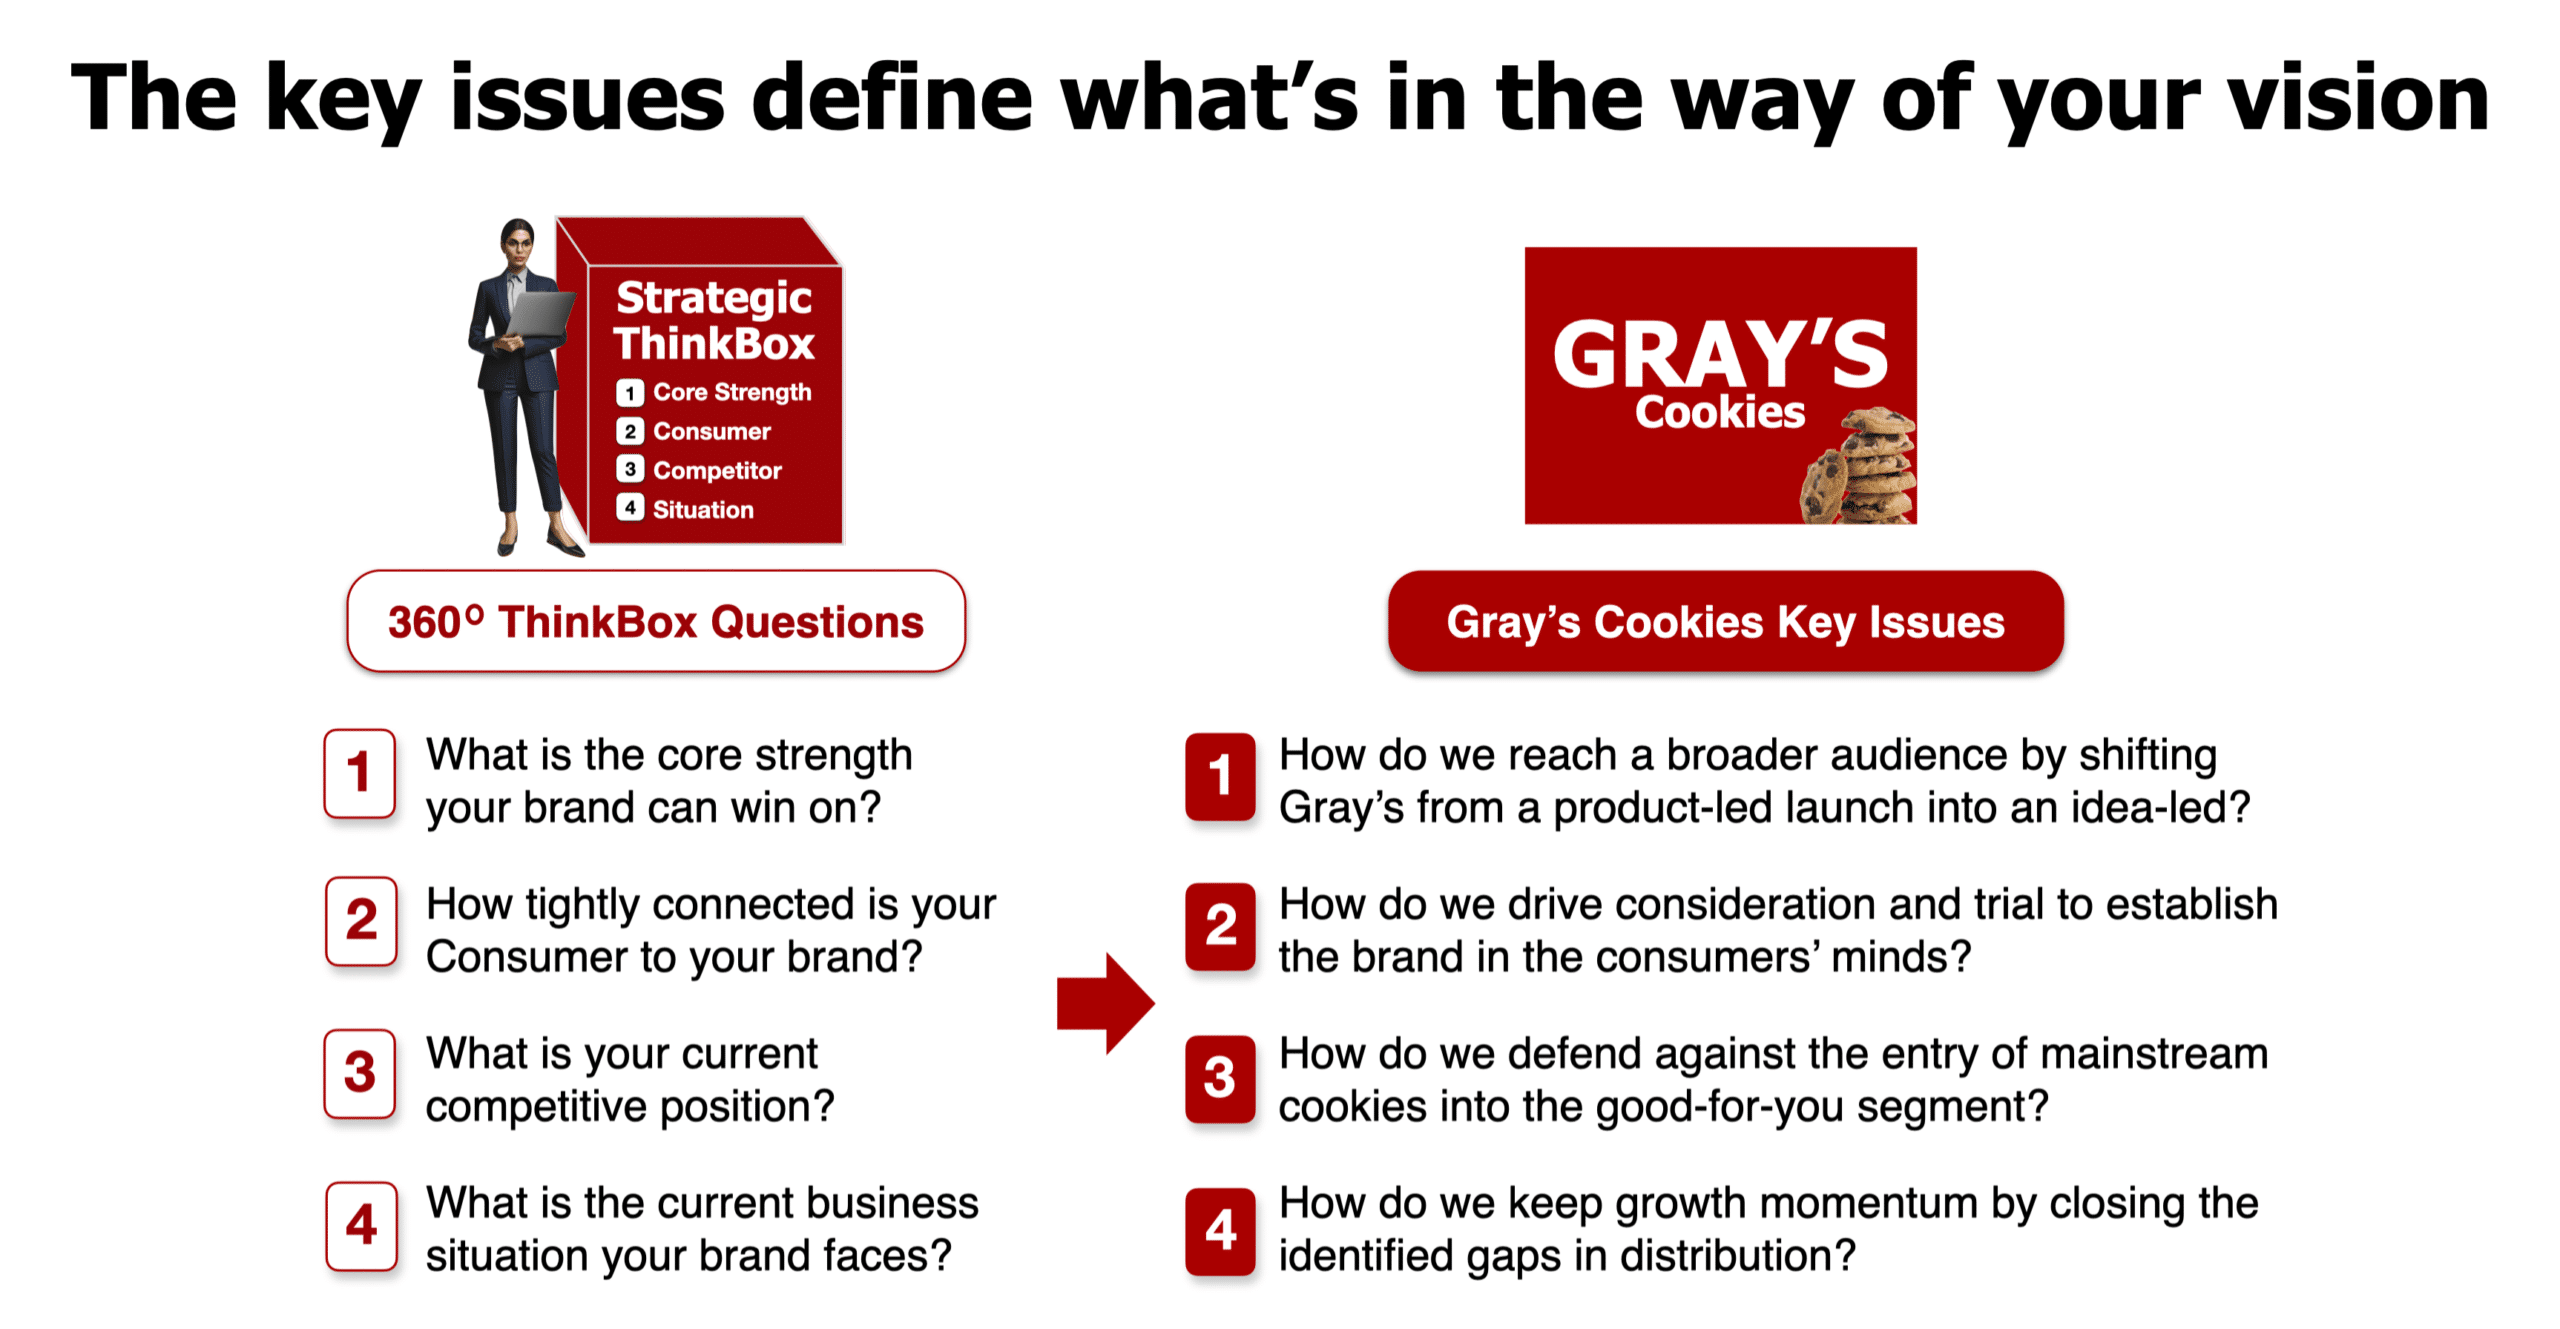 Key issues for Gray's Cookies